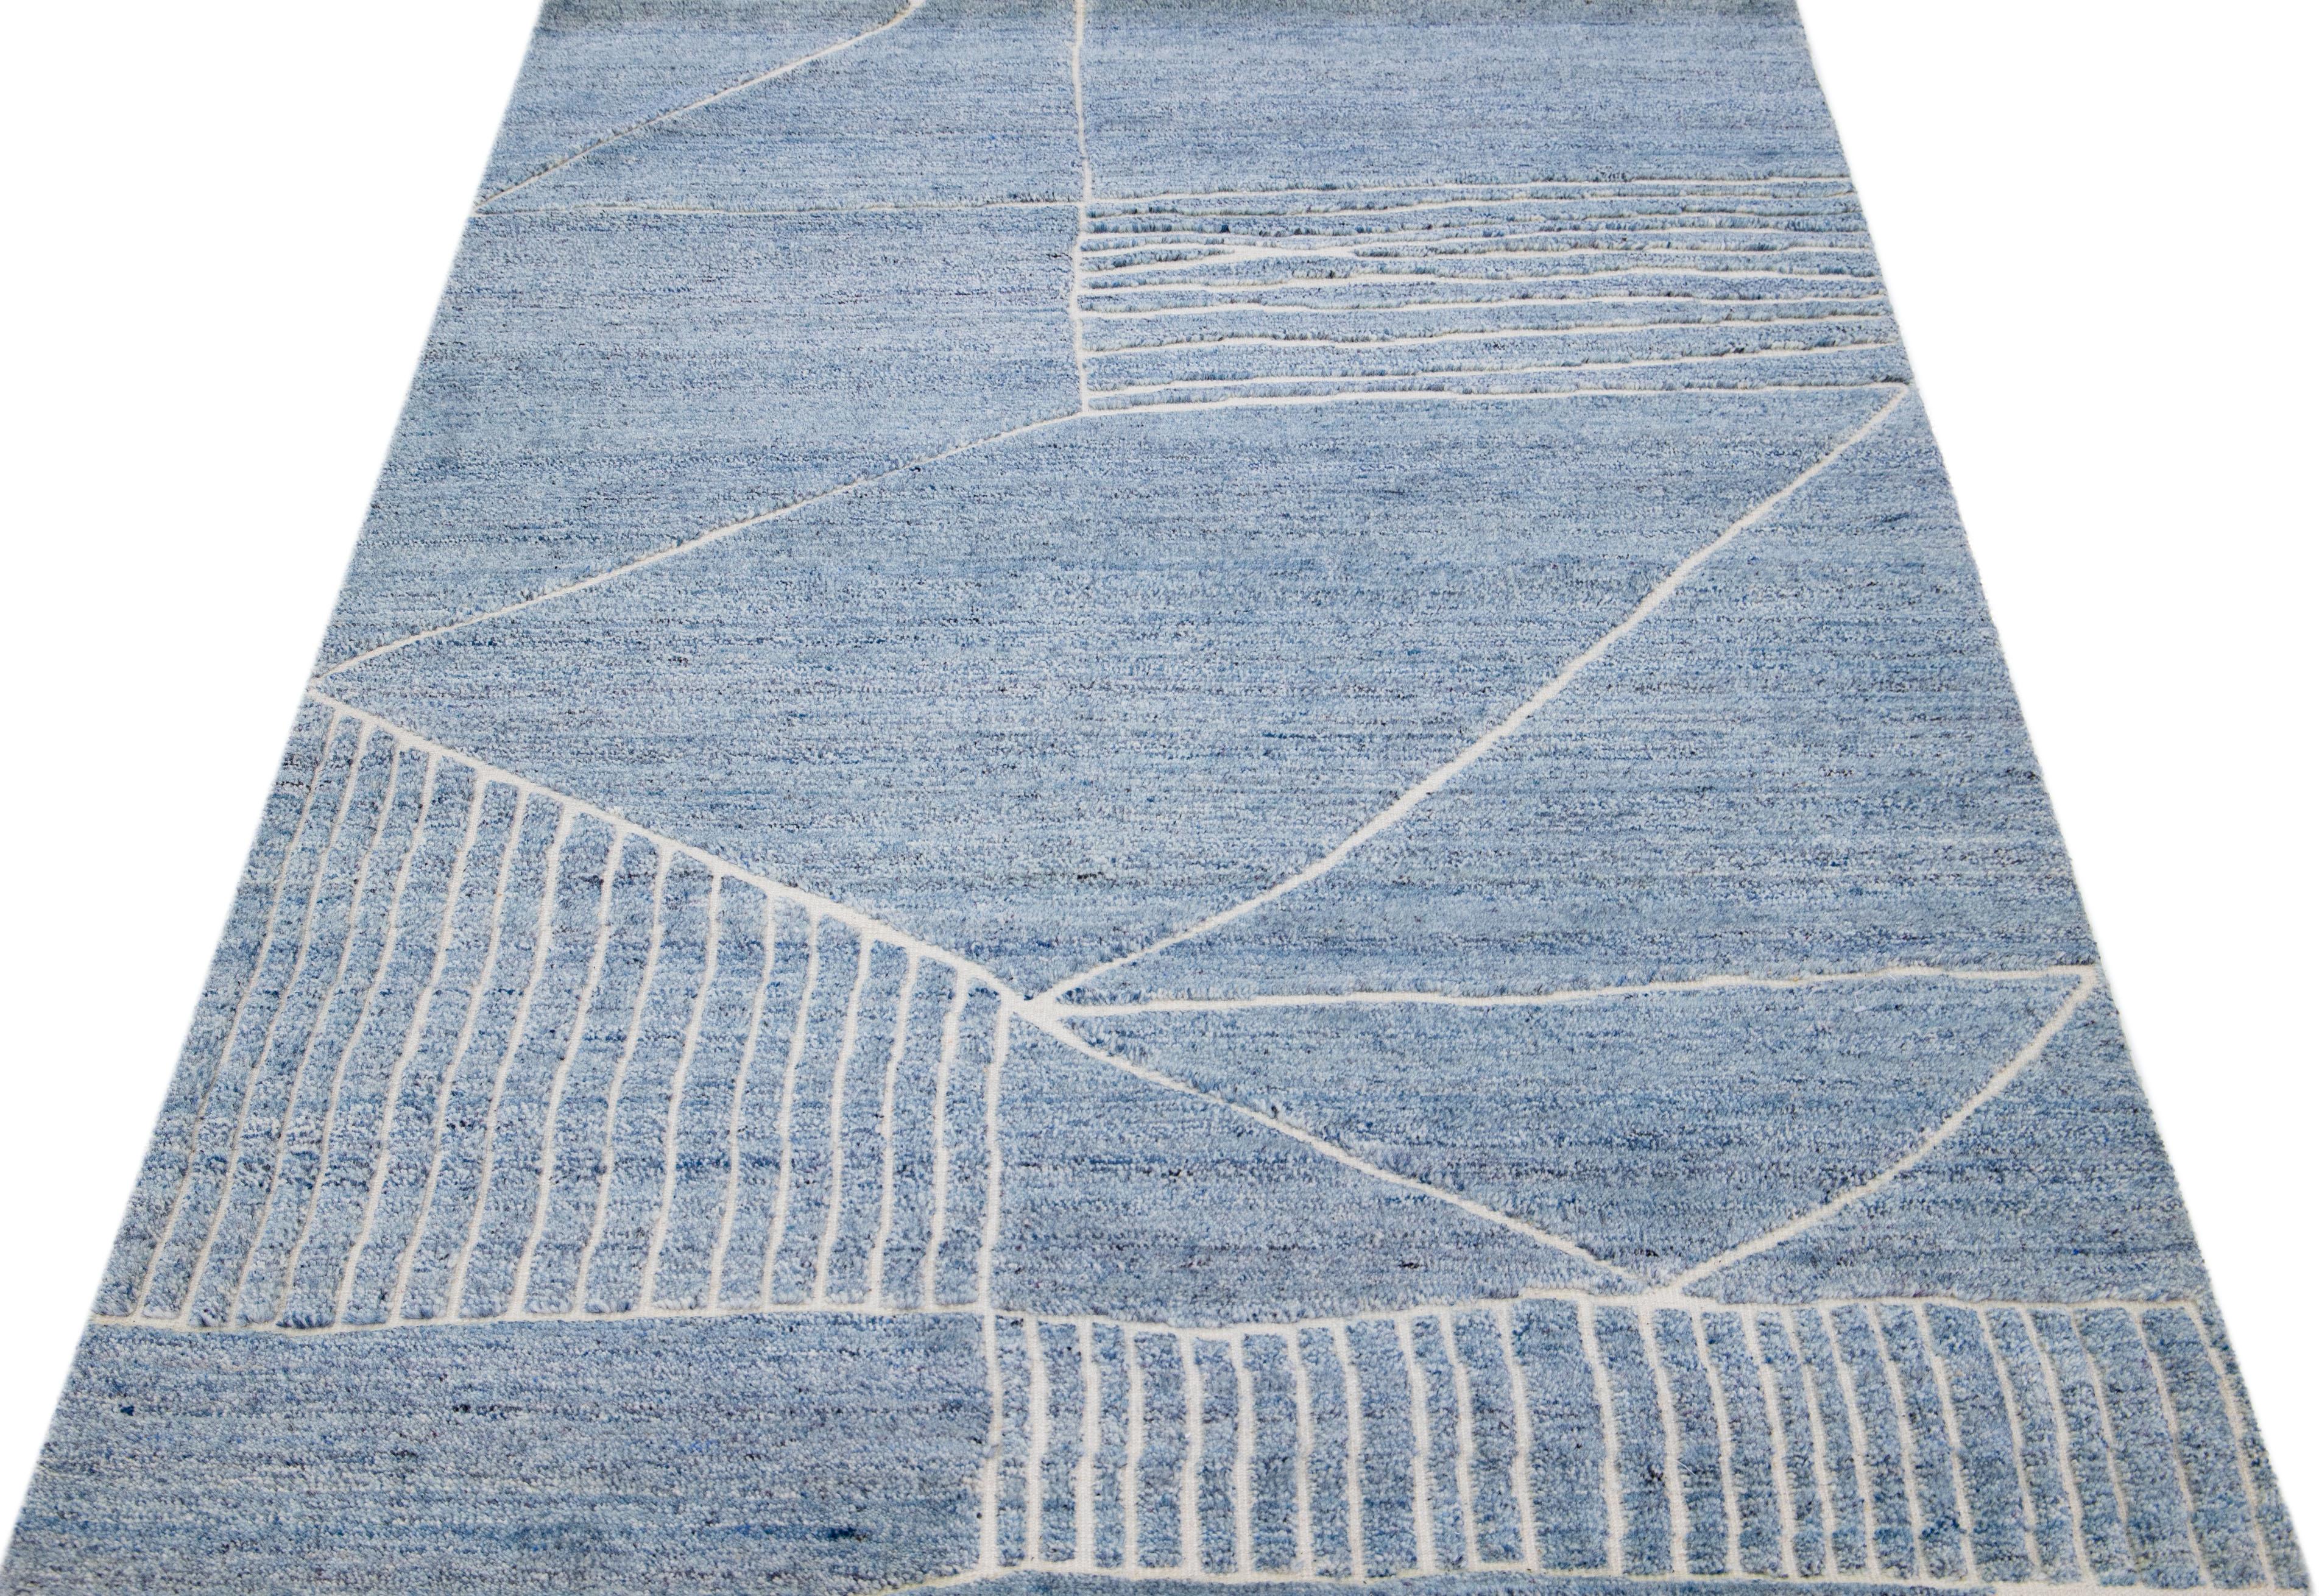 Beautiful modern Moroccan-style hand-knotted wool rug with a light blue color field. This rug is part of our Apadana's Safi Collection and features a geometric design in white.

This rug measures: 5'1